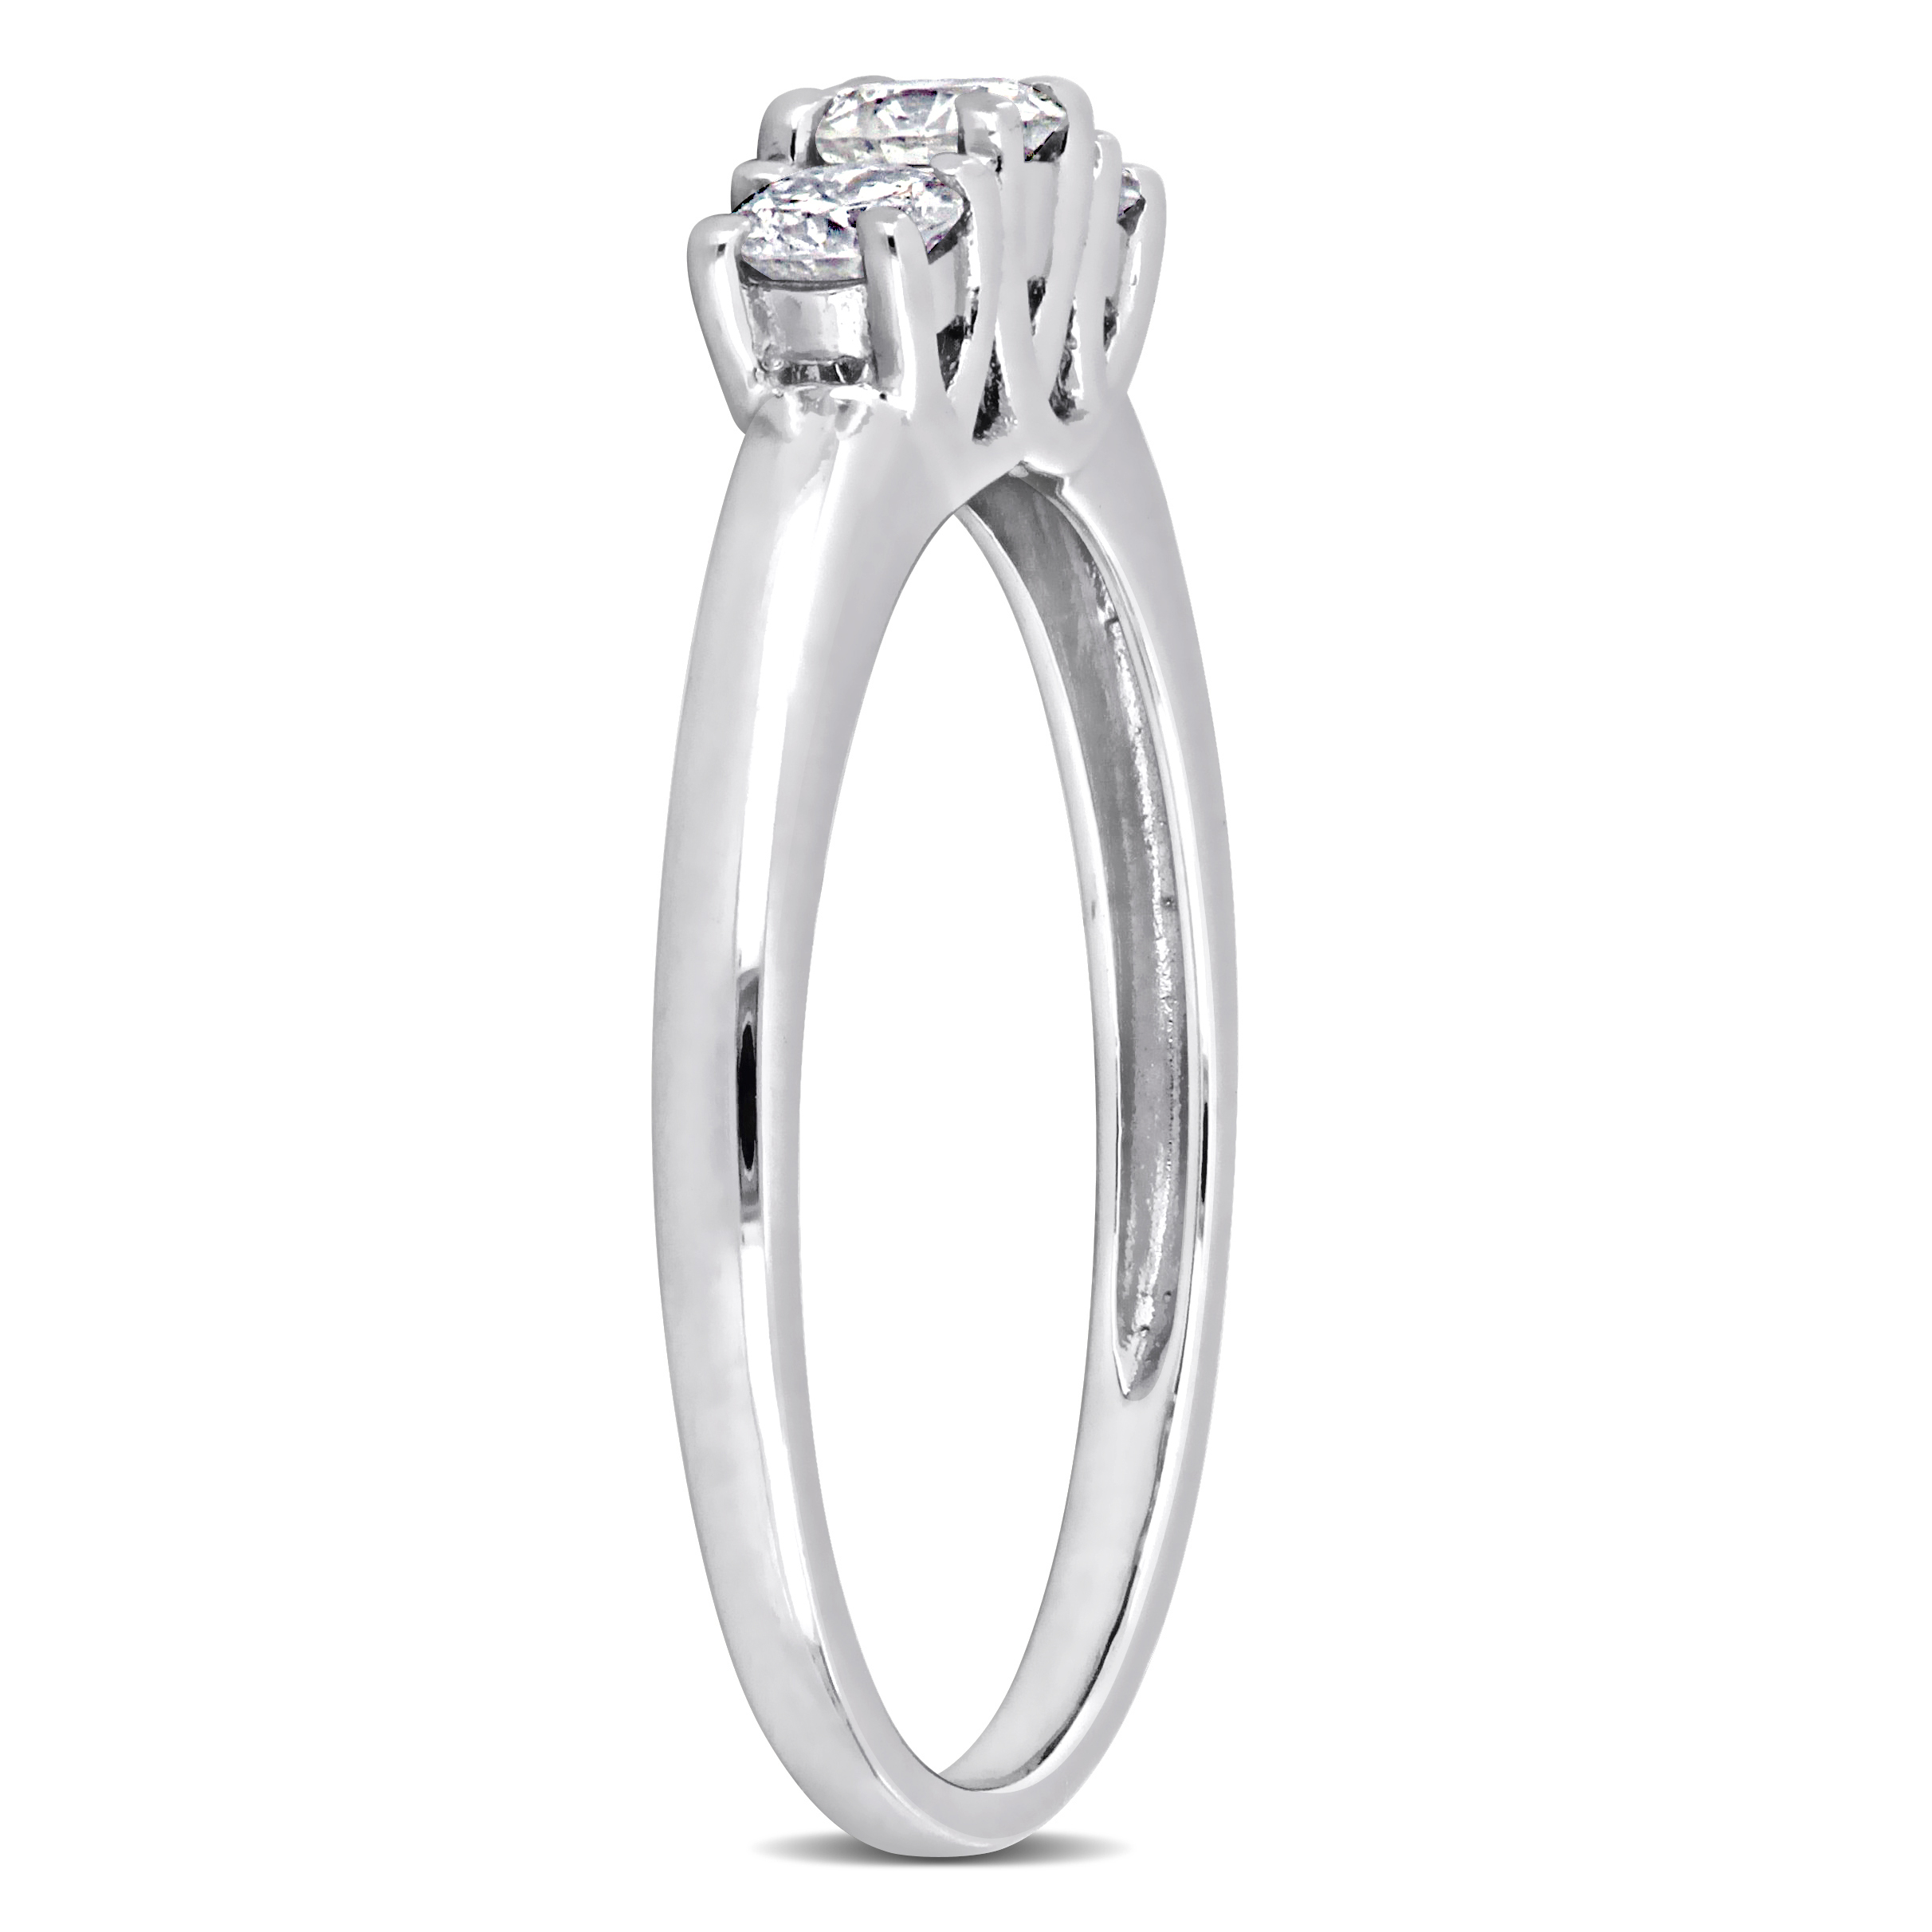 1/2 CT TW 3-Stone Diamond Engagement Ring in 14k White Gold